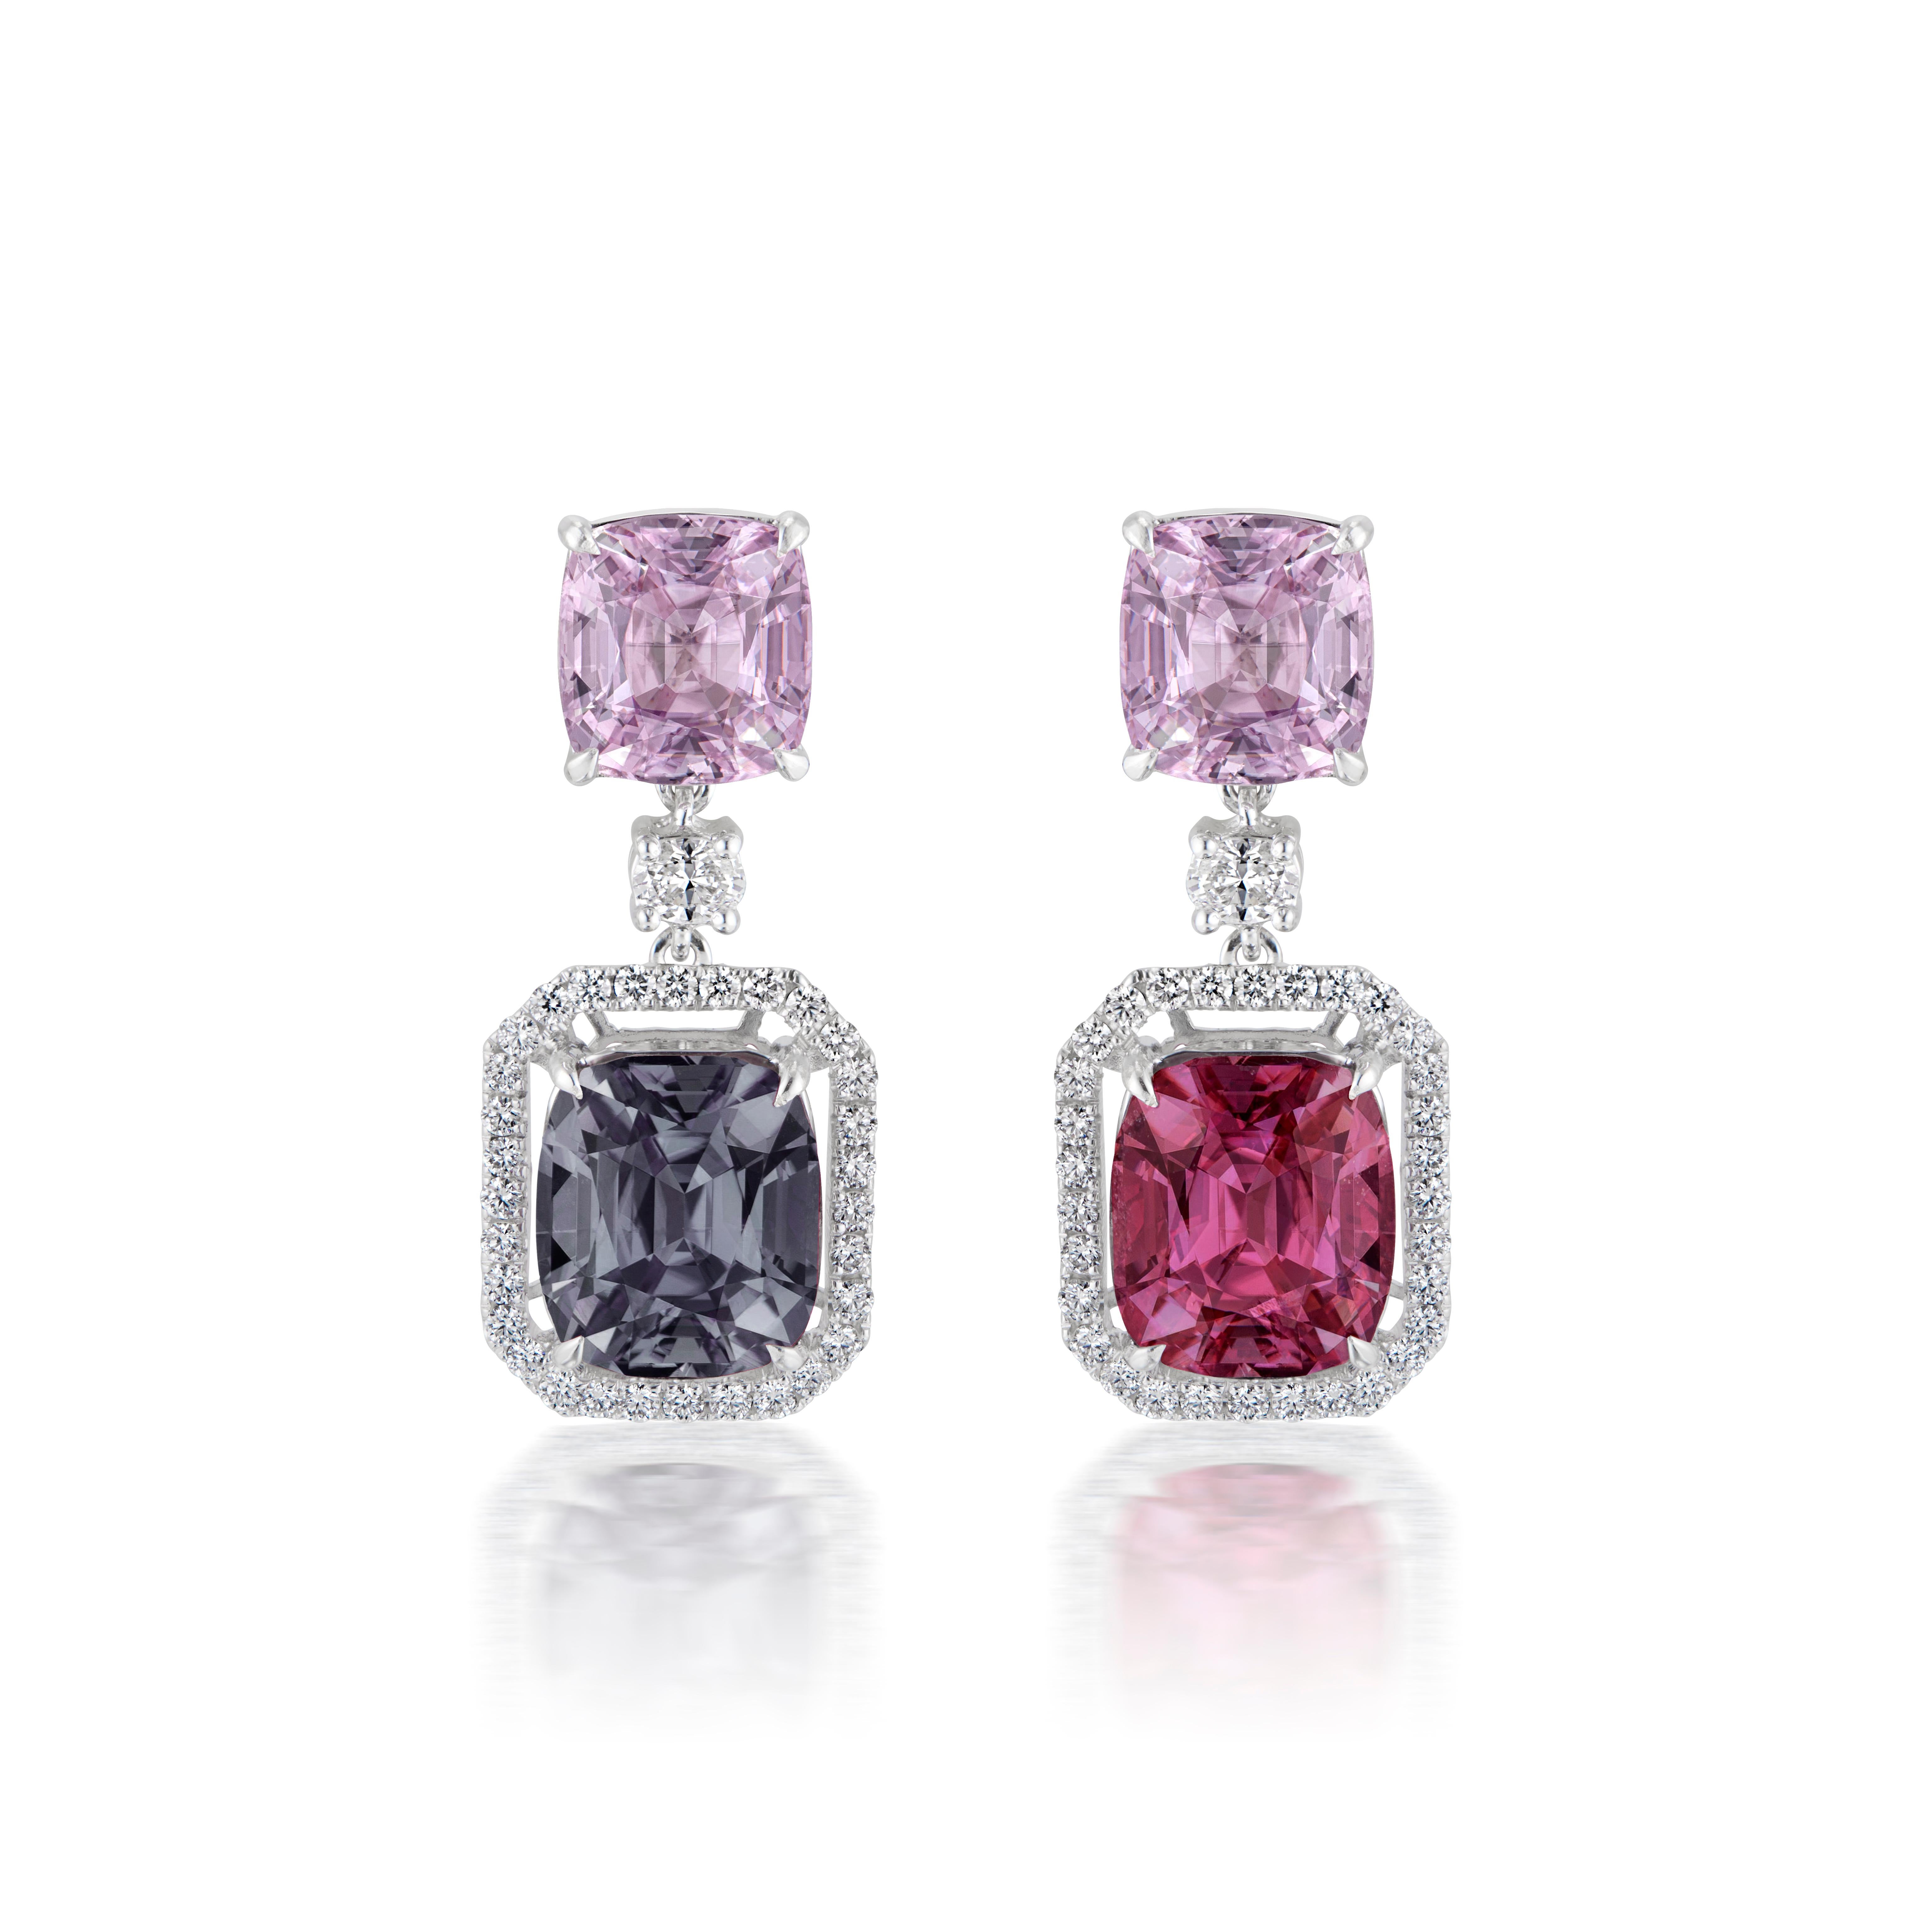 18K WHITE GOLD
61 ROUND DIAMONDS   0.70 CARATS
2 OVAL DIAMONDS   0.28 CARATS
4 BURMA SPINELS  21.40 CARATS 

Introducing our extraordinary Color Fusion Spinel Earrings, a celebration of bold and elegant color combinations. Crafted in 18k white gold,